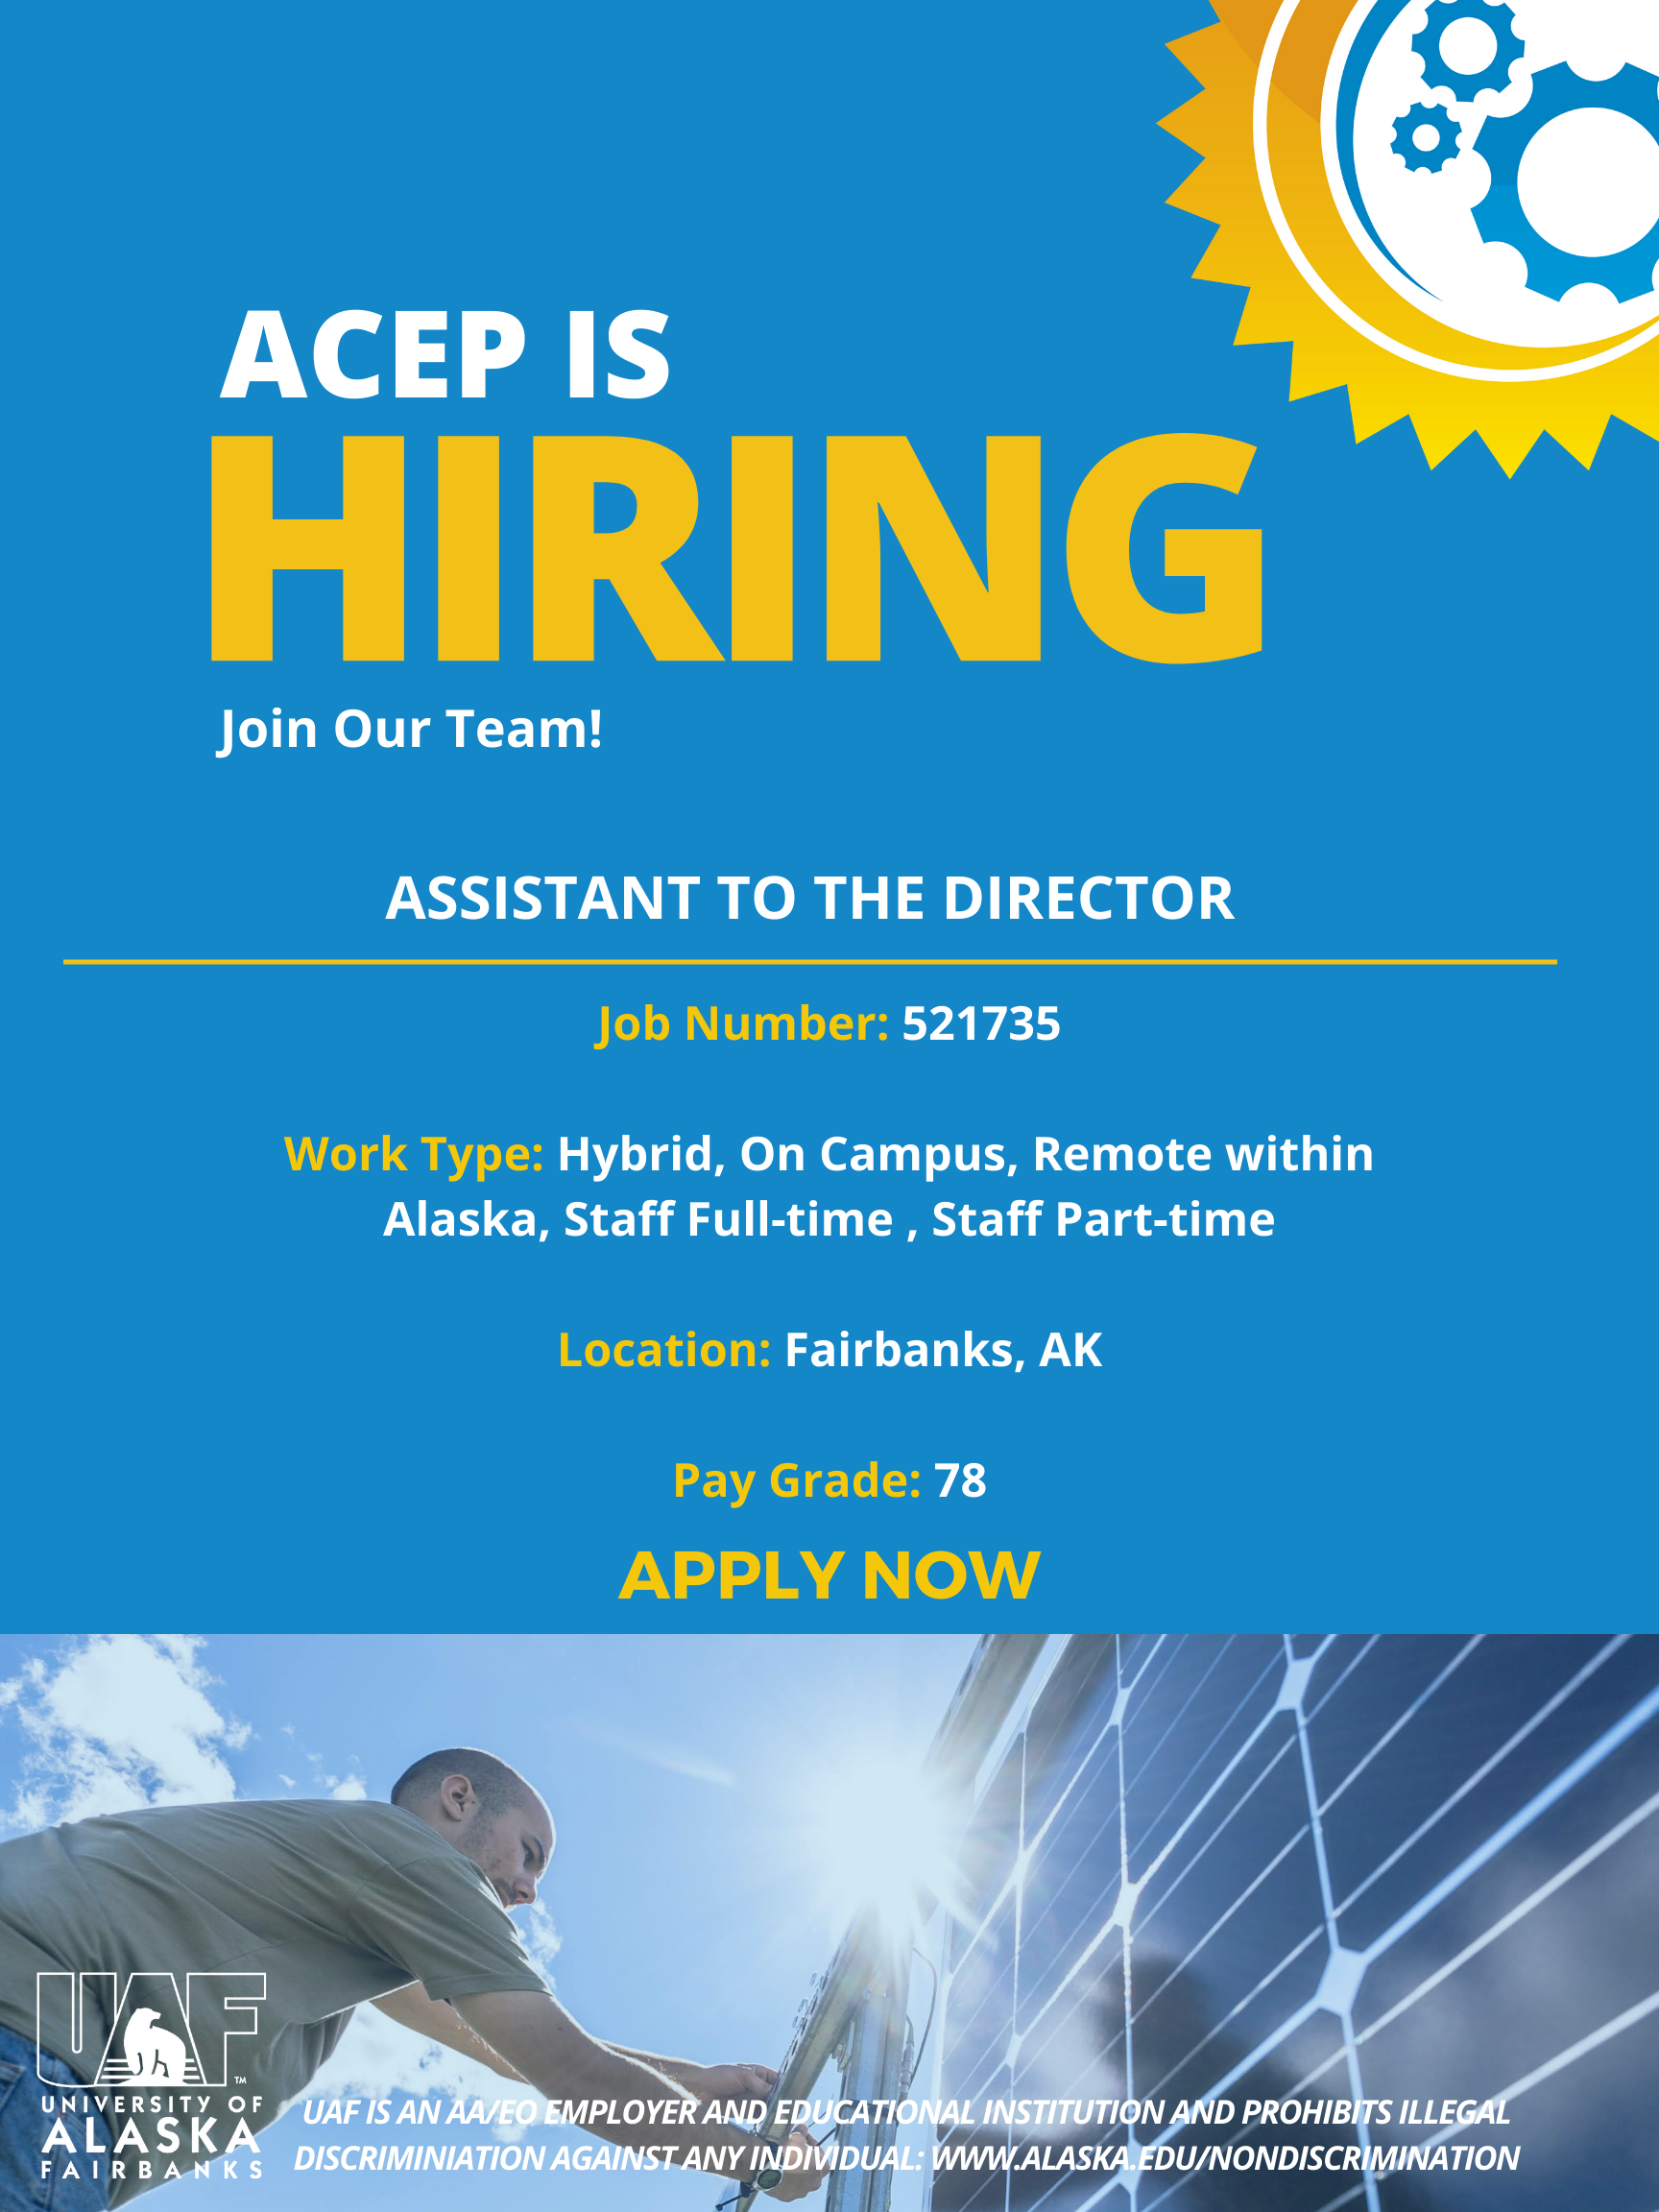 ACEP is Hiring! Assistant to the Director